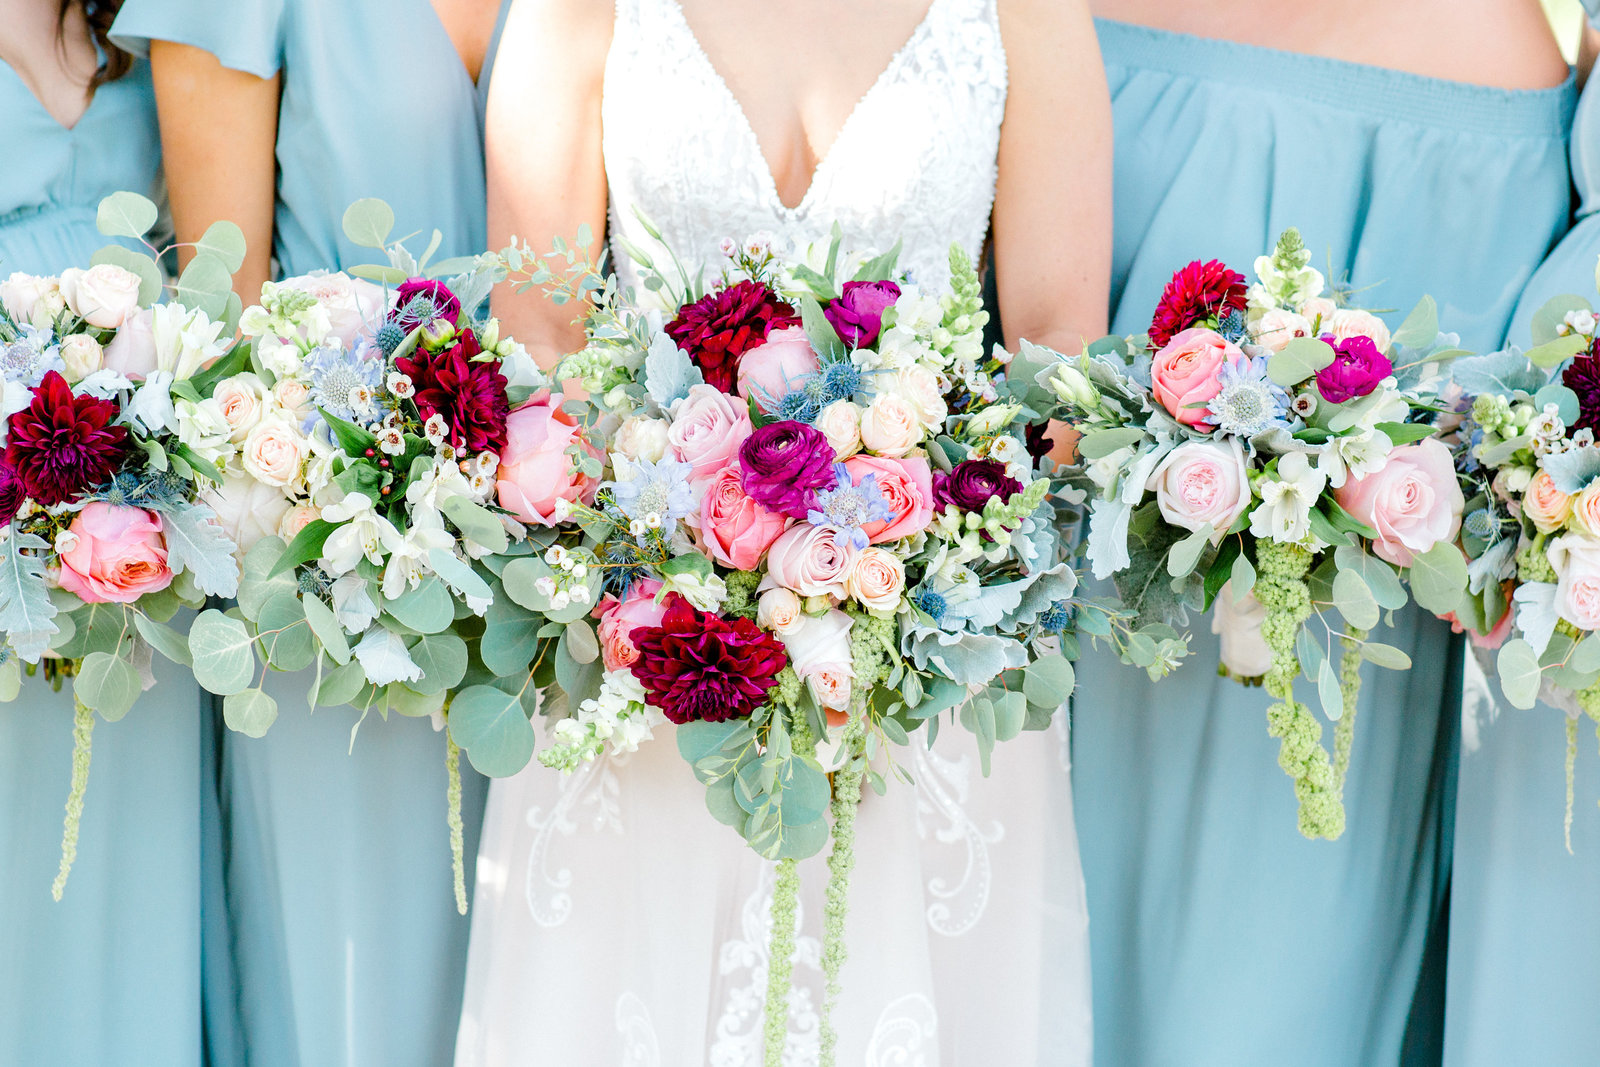 Bouquets with pastel colors and a pop of burgundy